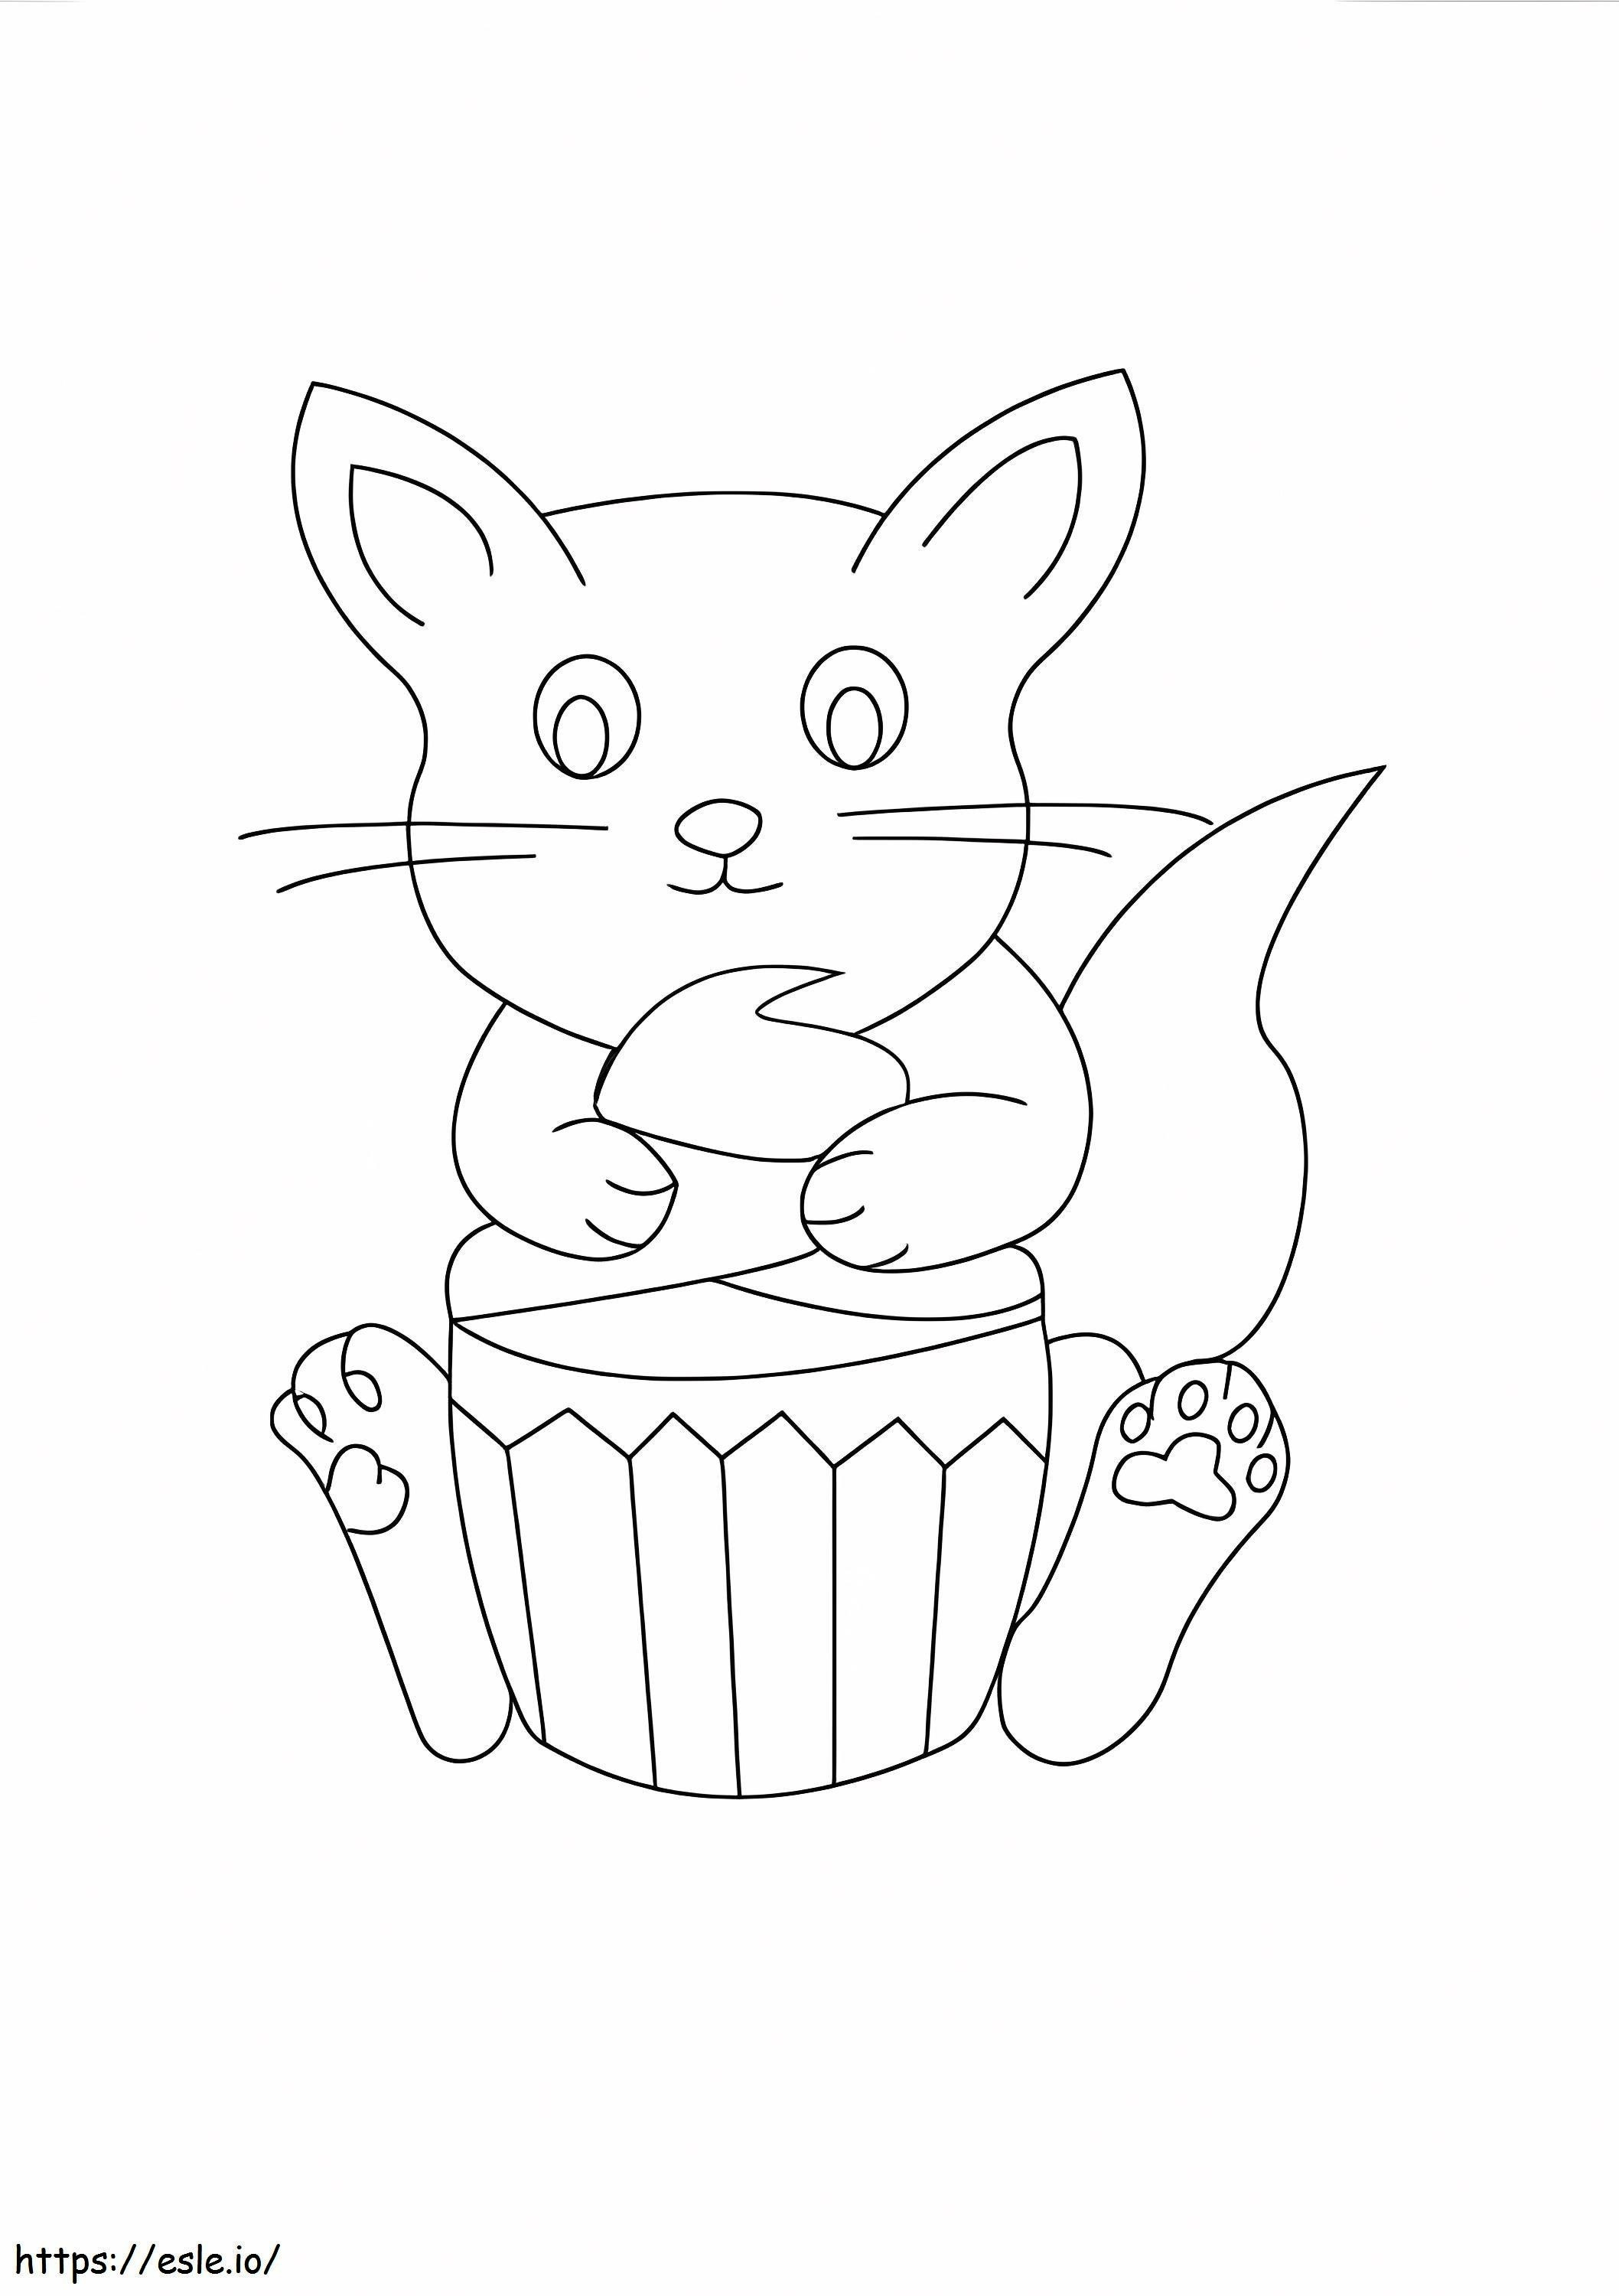 Big Cat On Cupcake coloring page